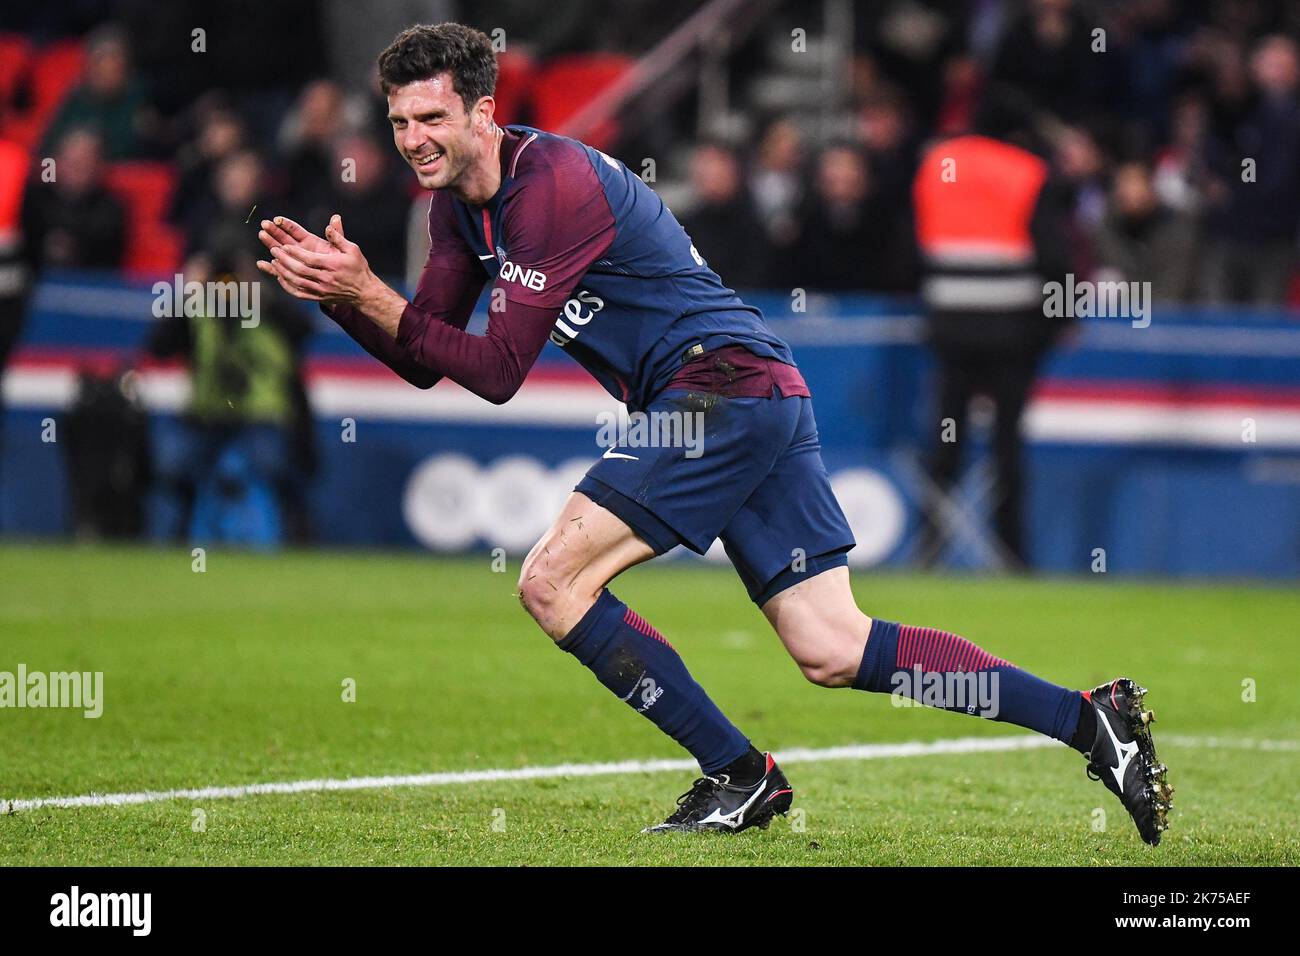 Paris Saint Germain's Thiago Motta in action during the French Ligue 1 soccer match between Paris Saint Germain (PSG) and Racing Club Strasbourg Alsace at the Parc des Princes stadium in Paris, France, 17 February 2018.  Stock Photo